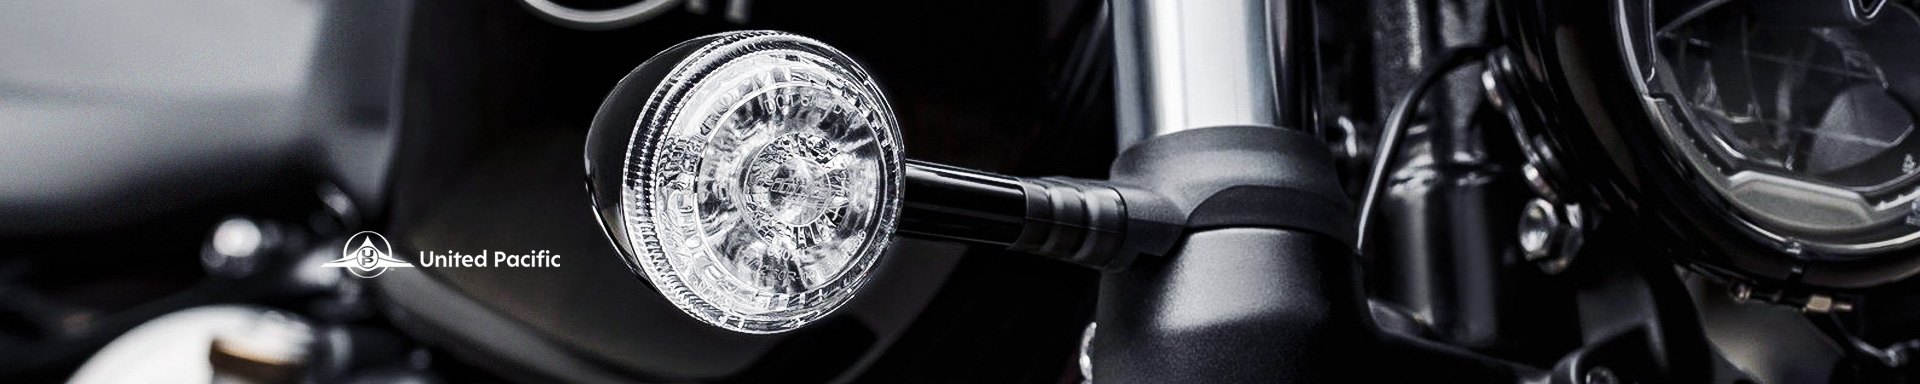 United Pacific Motorcycle Headlights